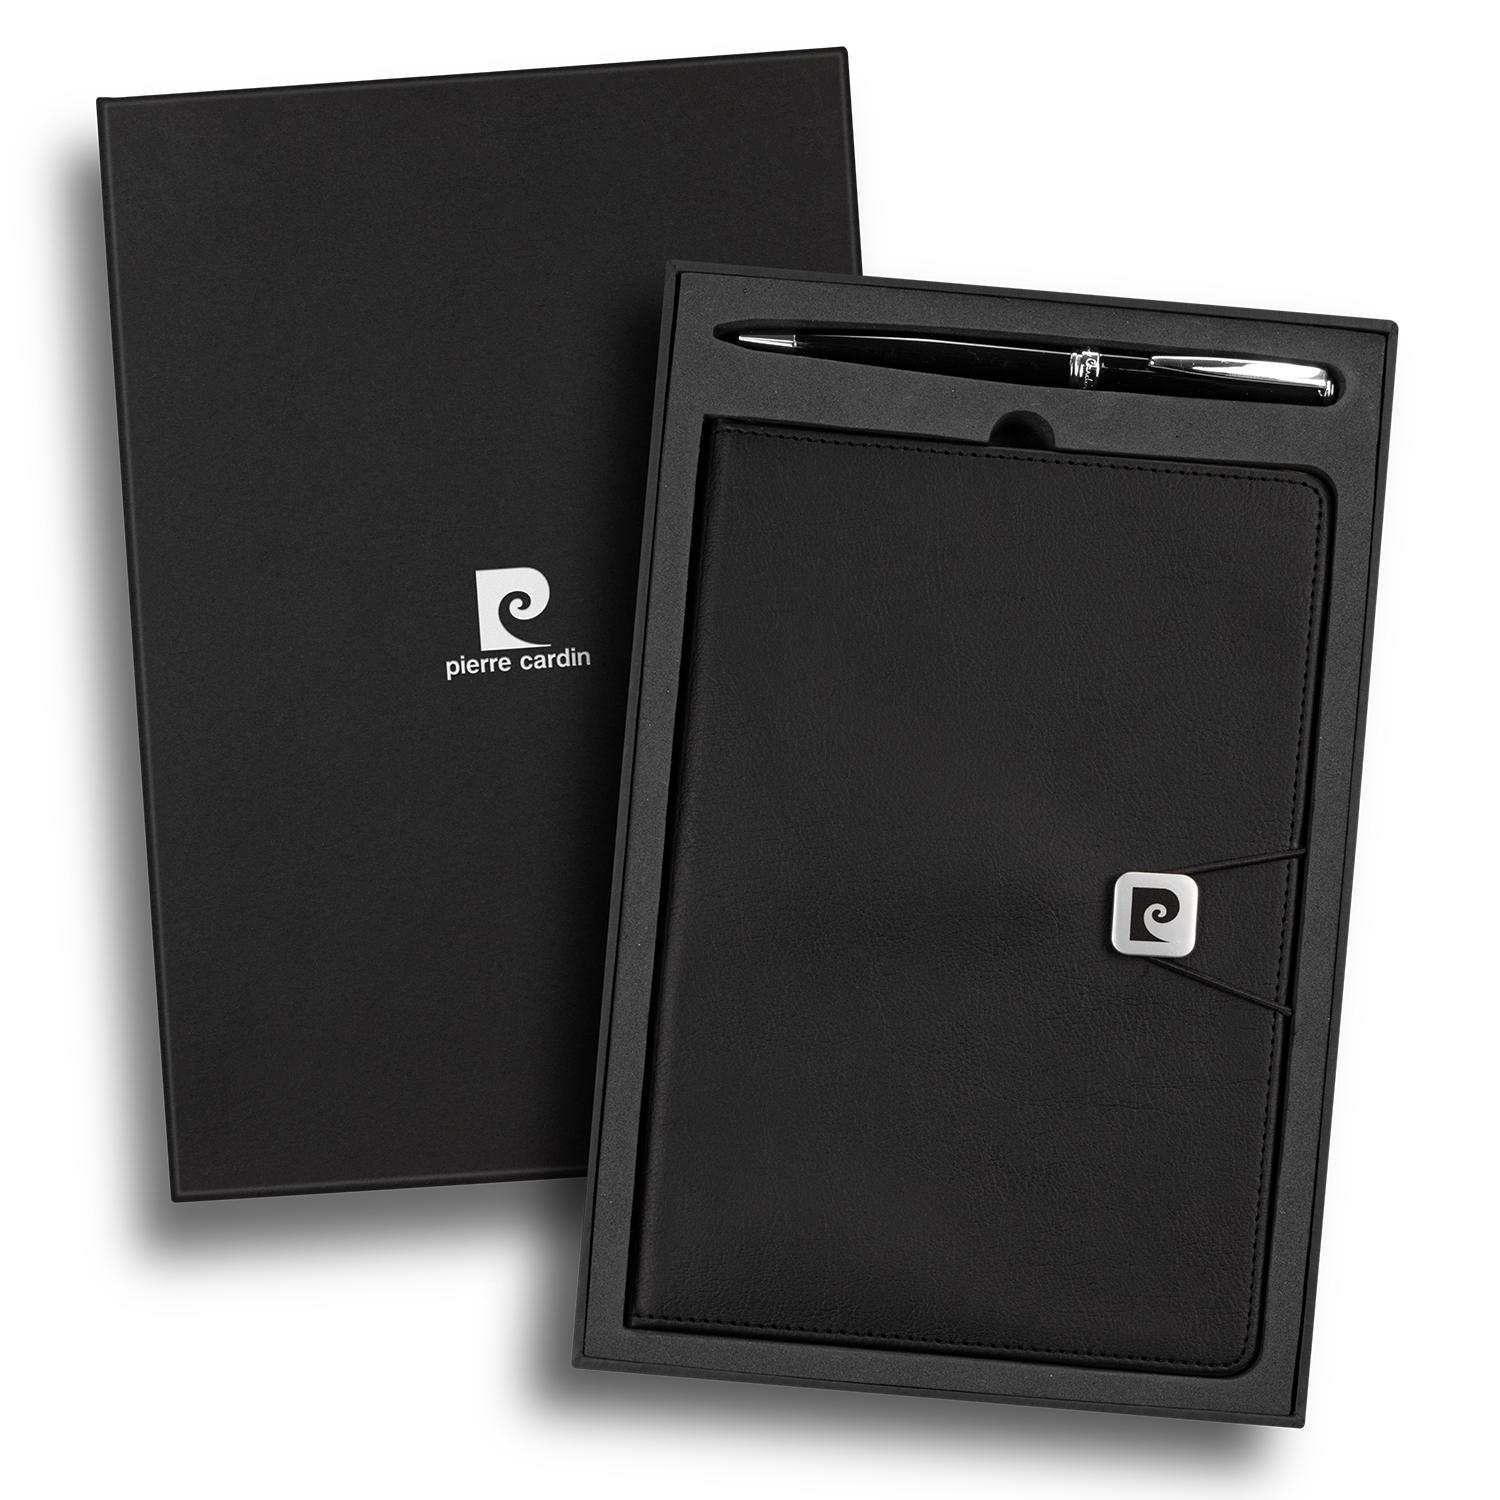 Conference Pierre Cardin Biarritz Notebook and Pen Gift Set and